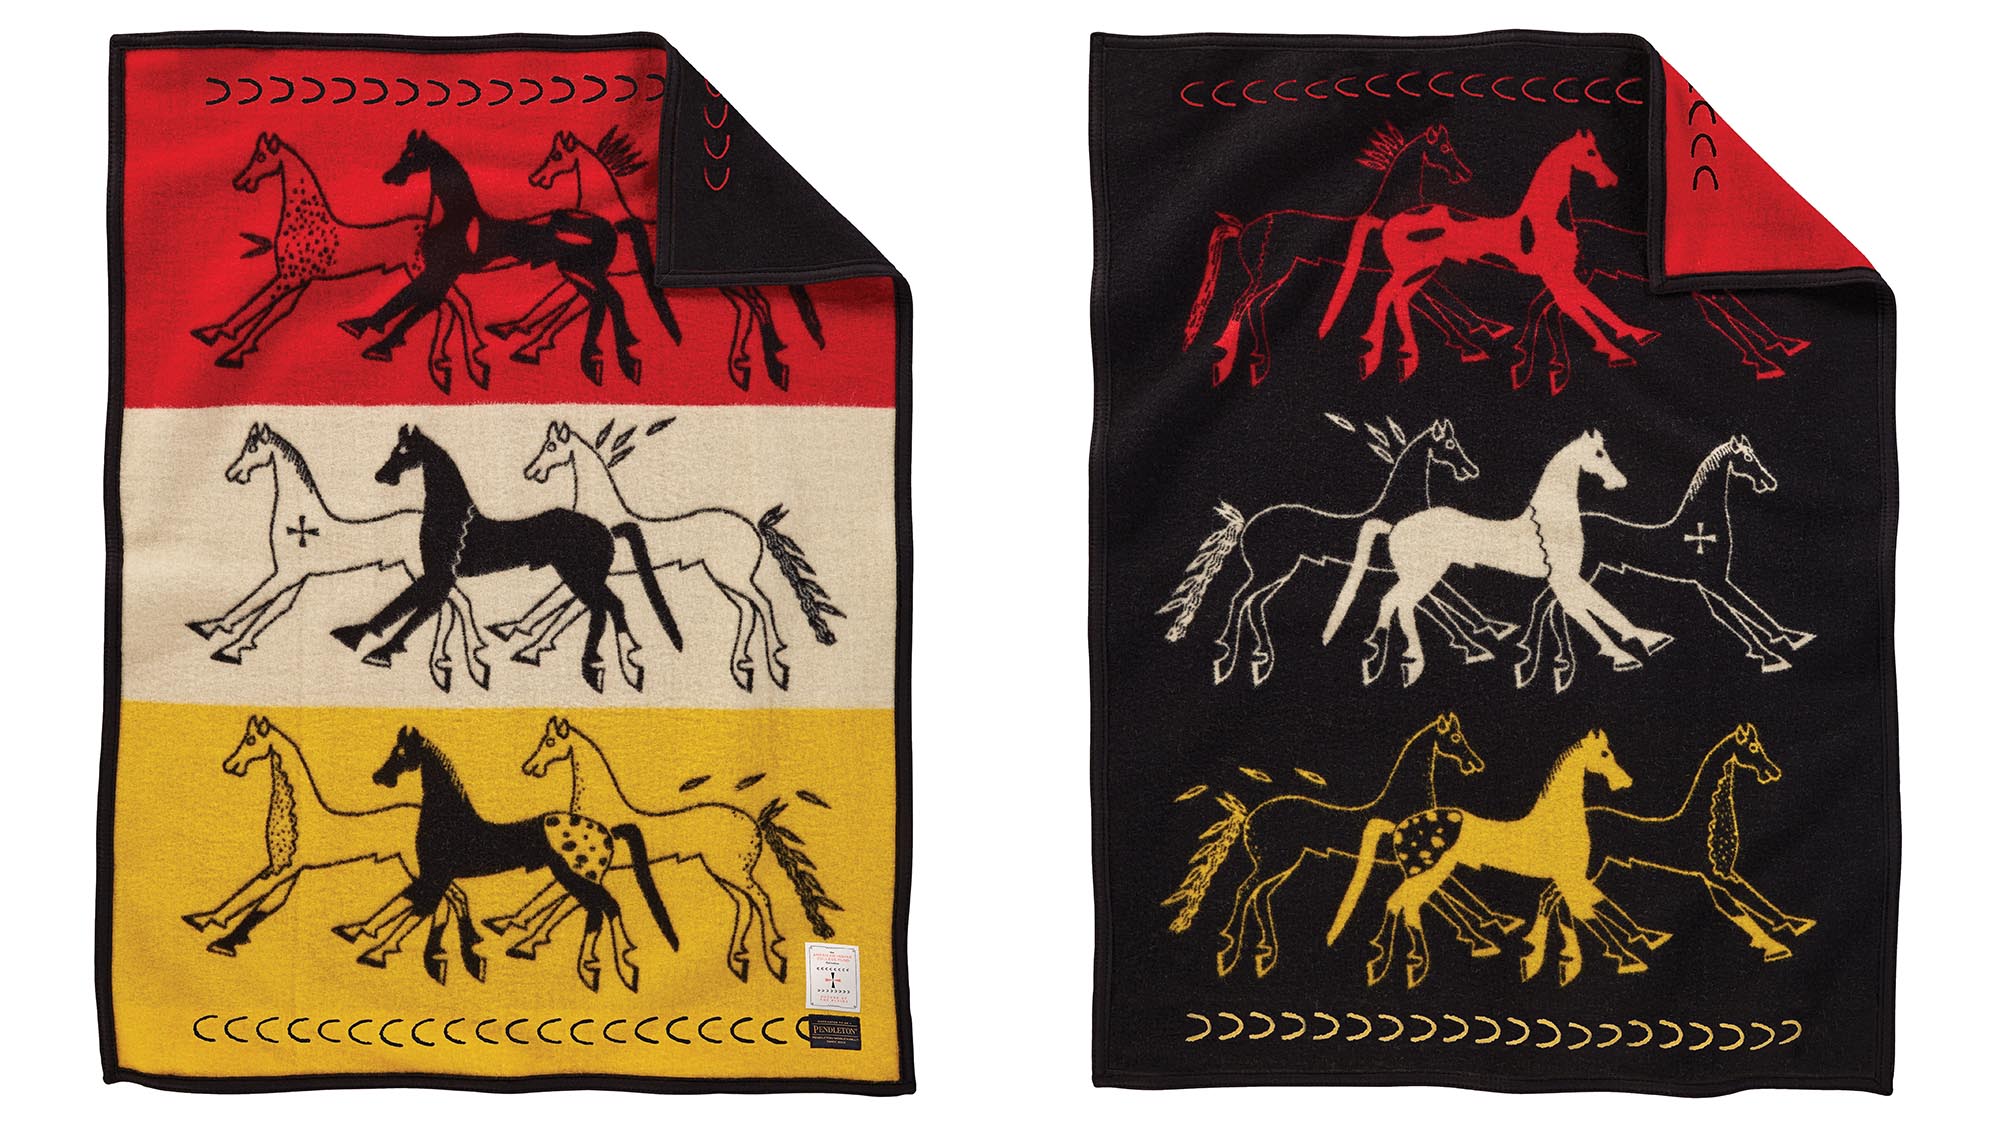 Future of the Plains Blanket with three horses on it